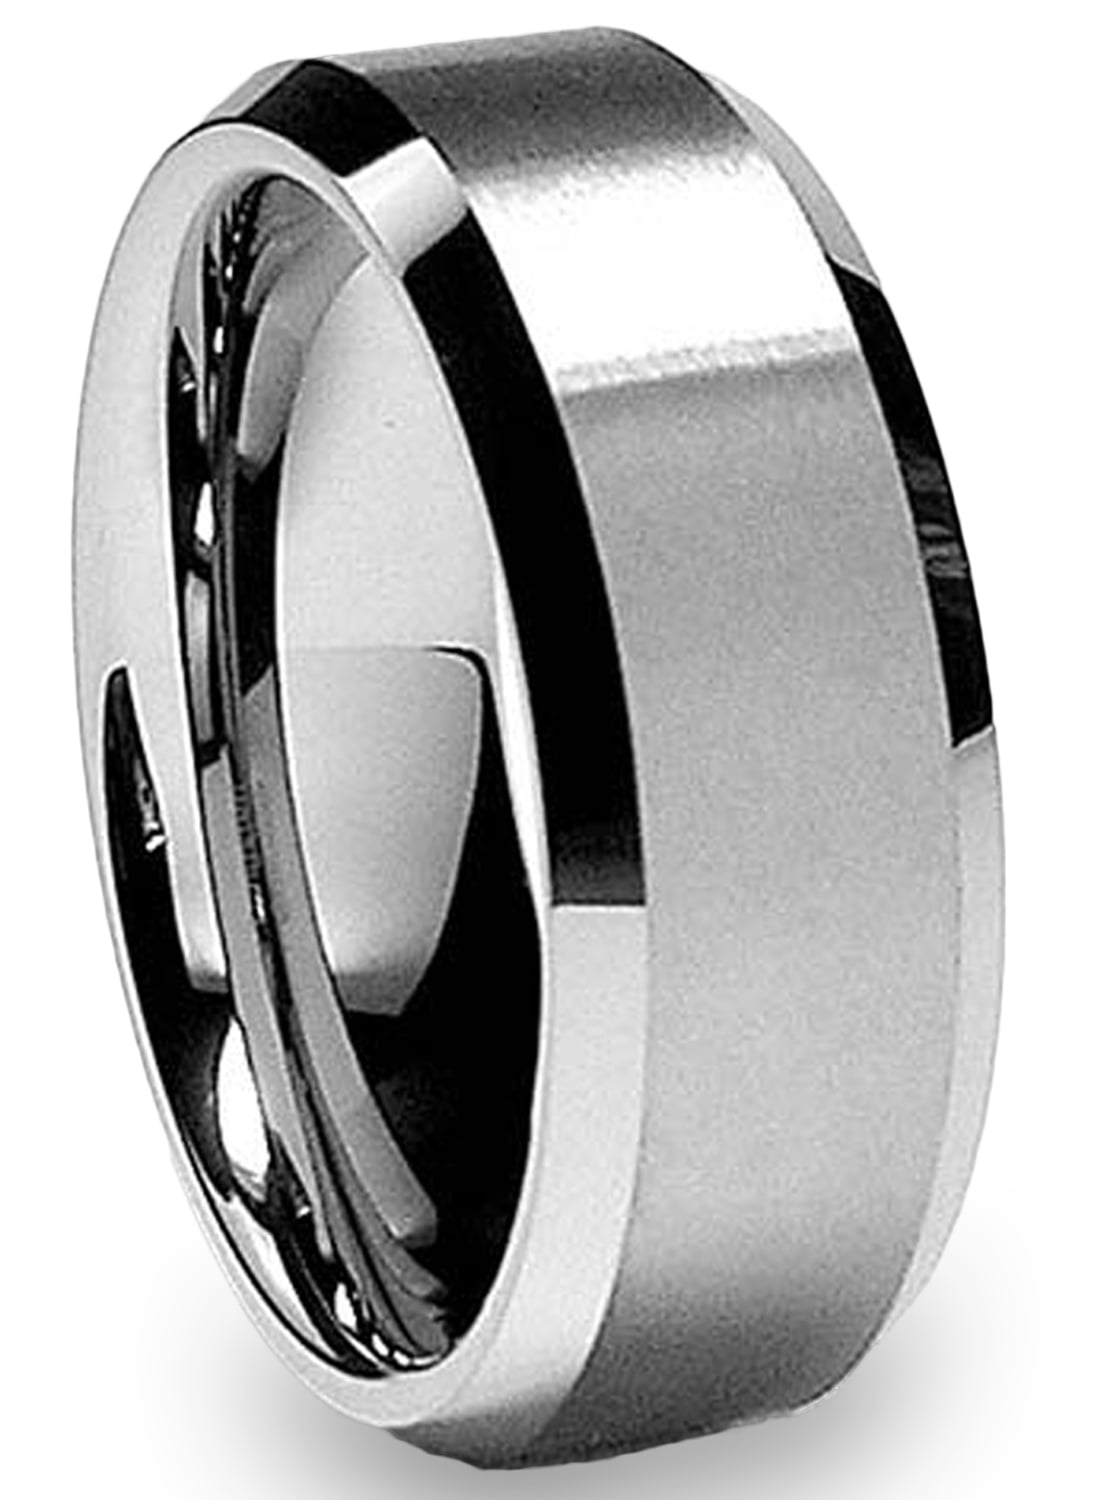 Silver Tungsten Carbide Tiara Ring 8mm Wedding Band Anniversary Ring for Men and Women Size 8.5